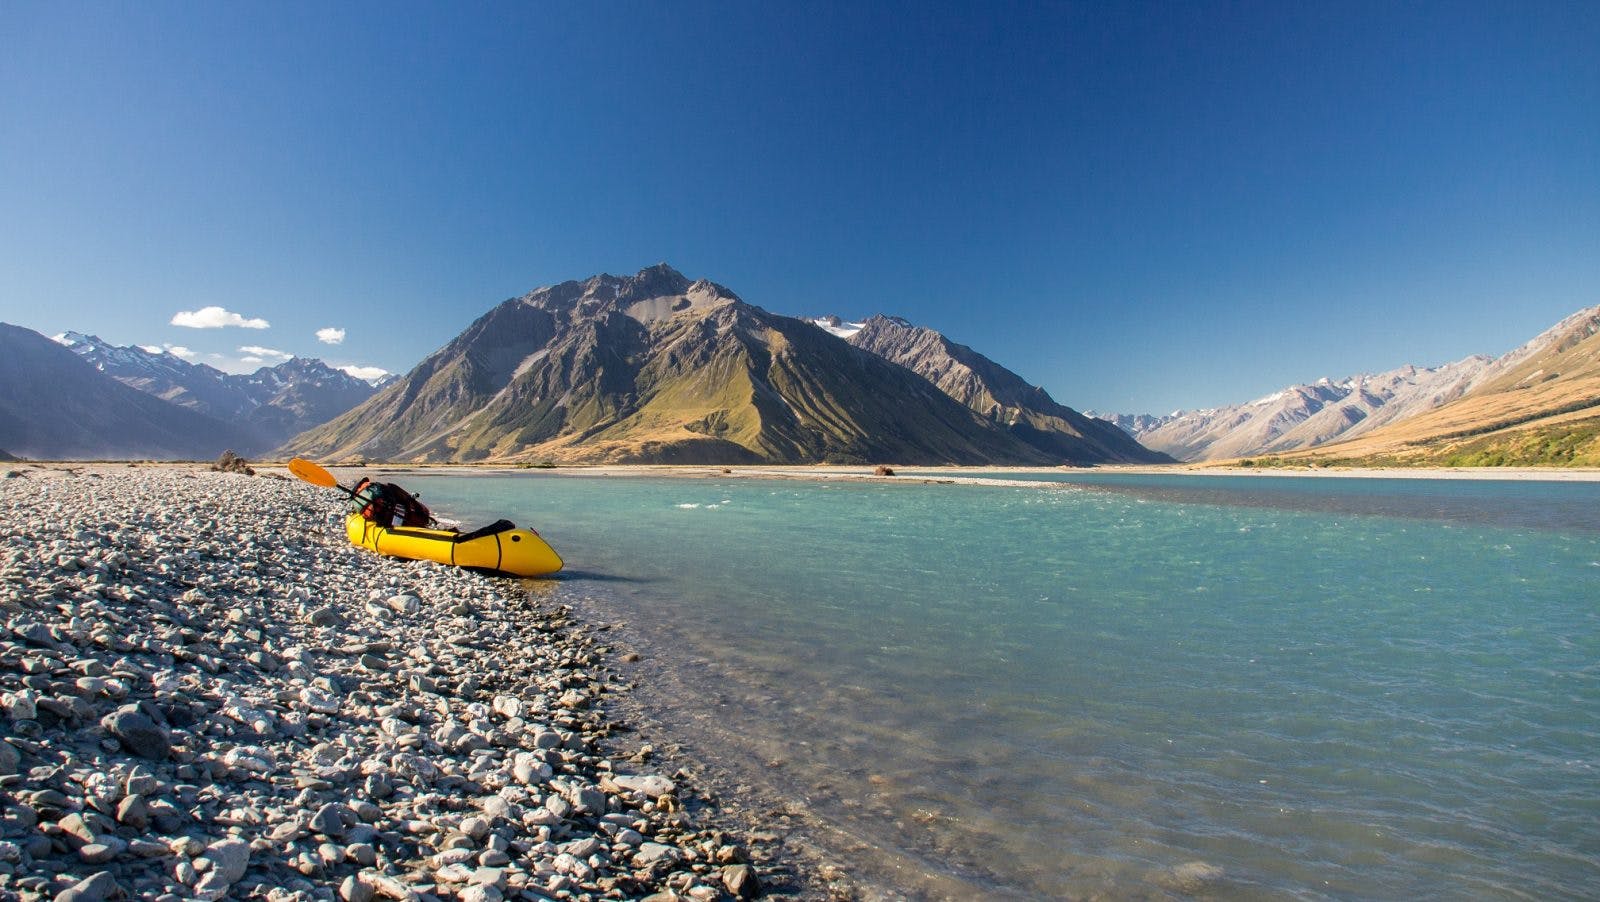 Taking out near the Dobson-Harper river confluence after a perfect day crossing the mountains from Lake Pukaki and paddling down the Dobson; NZ South Island Traverse